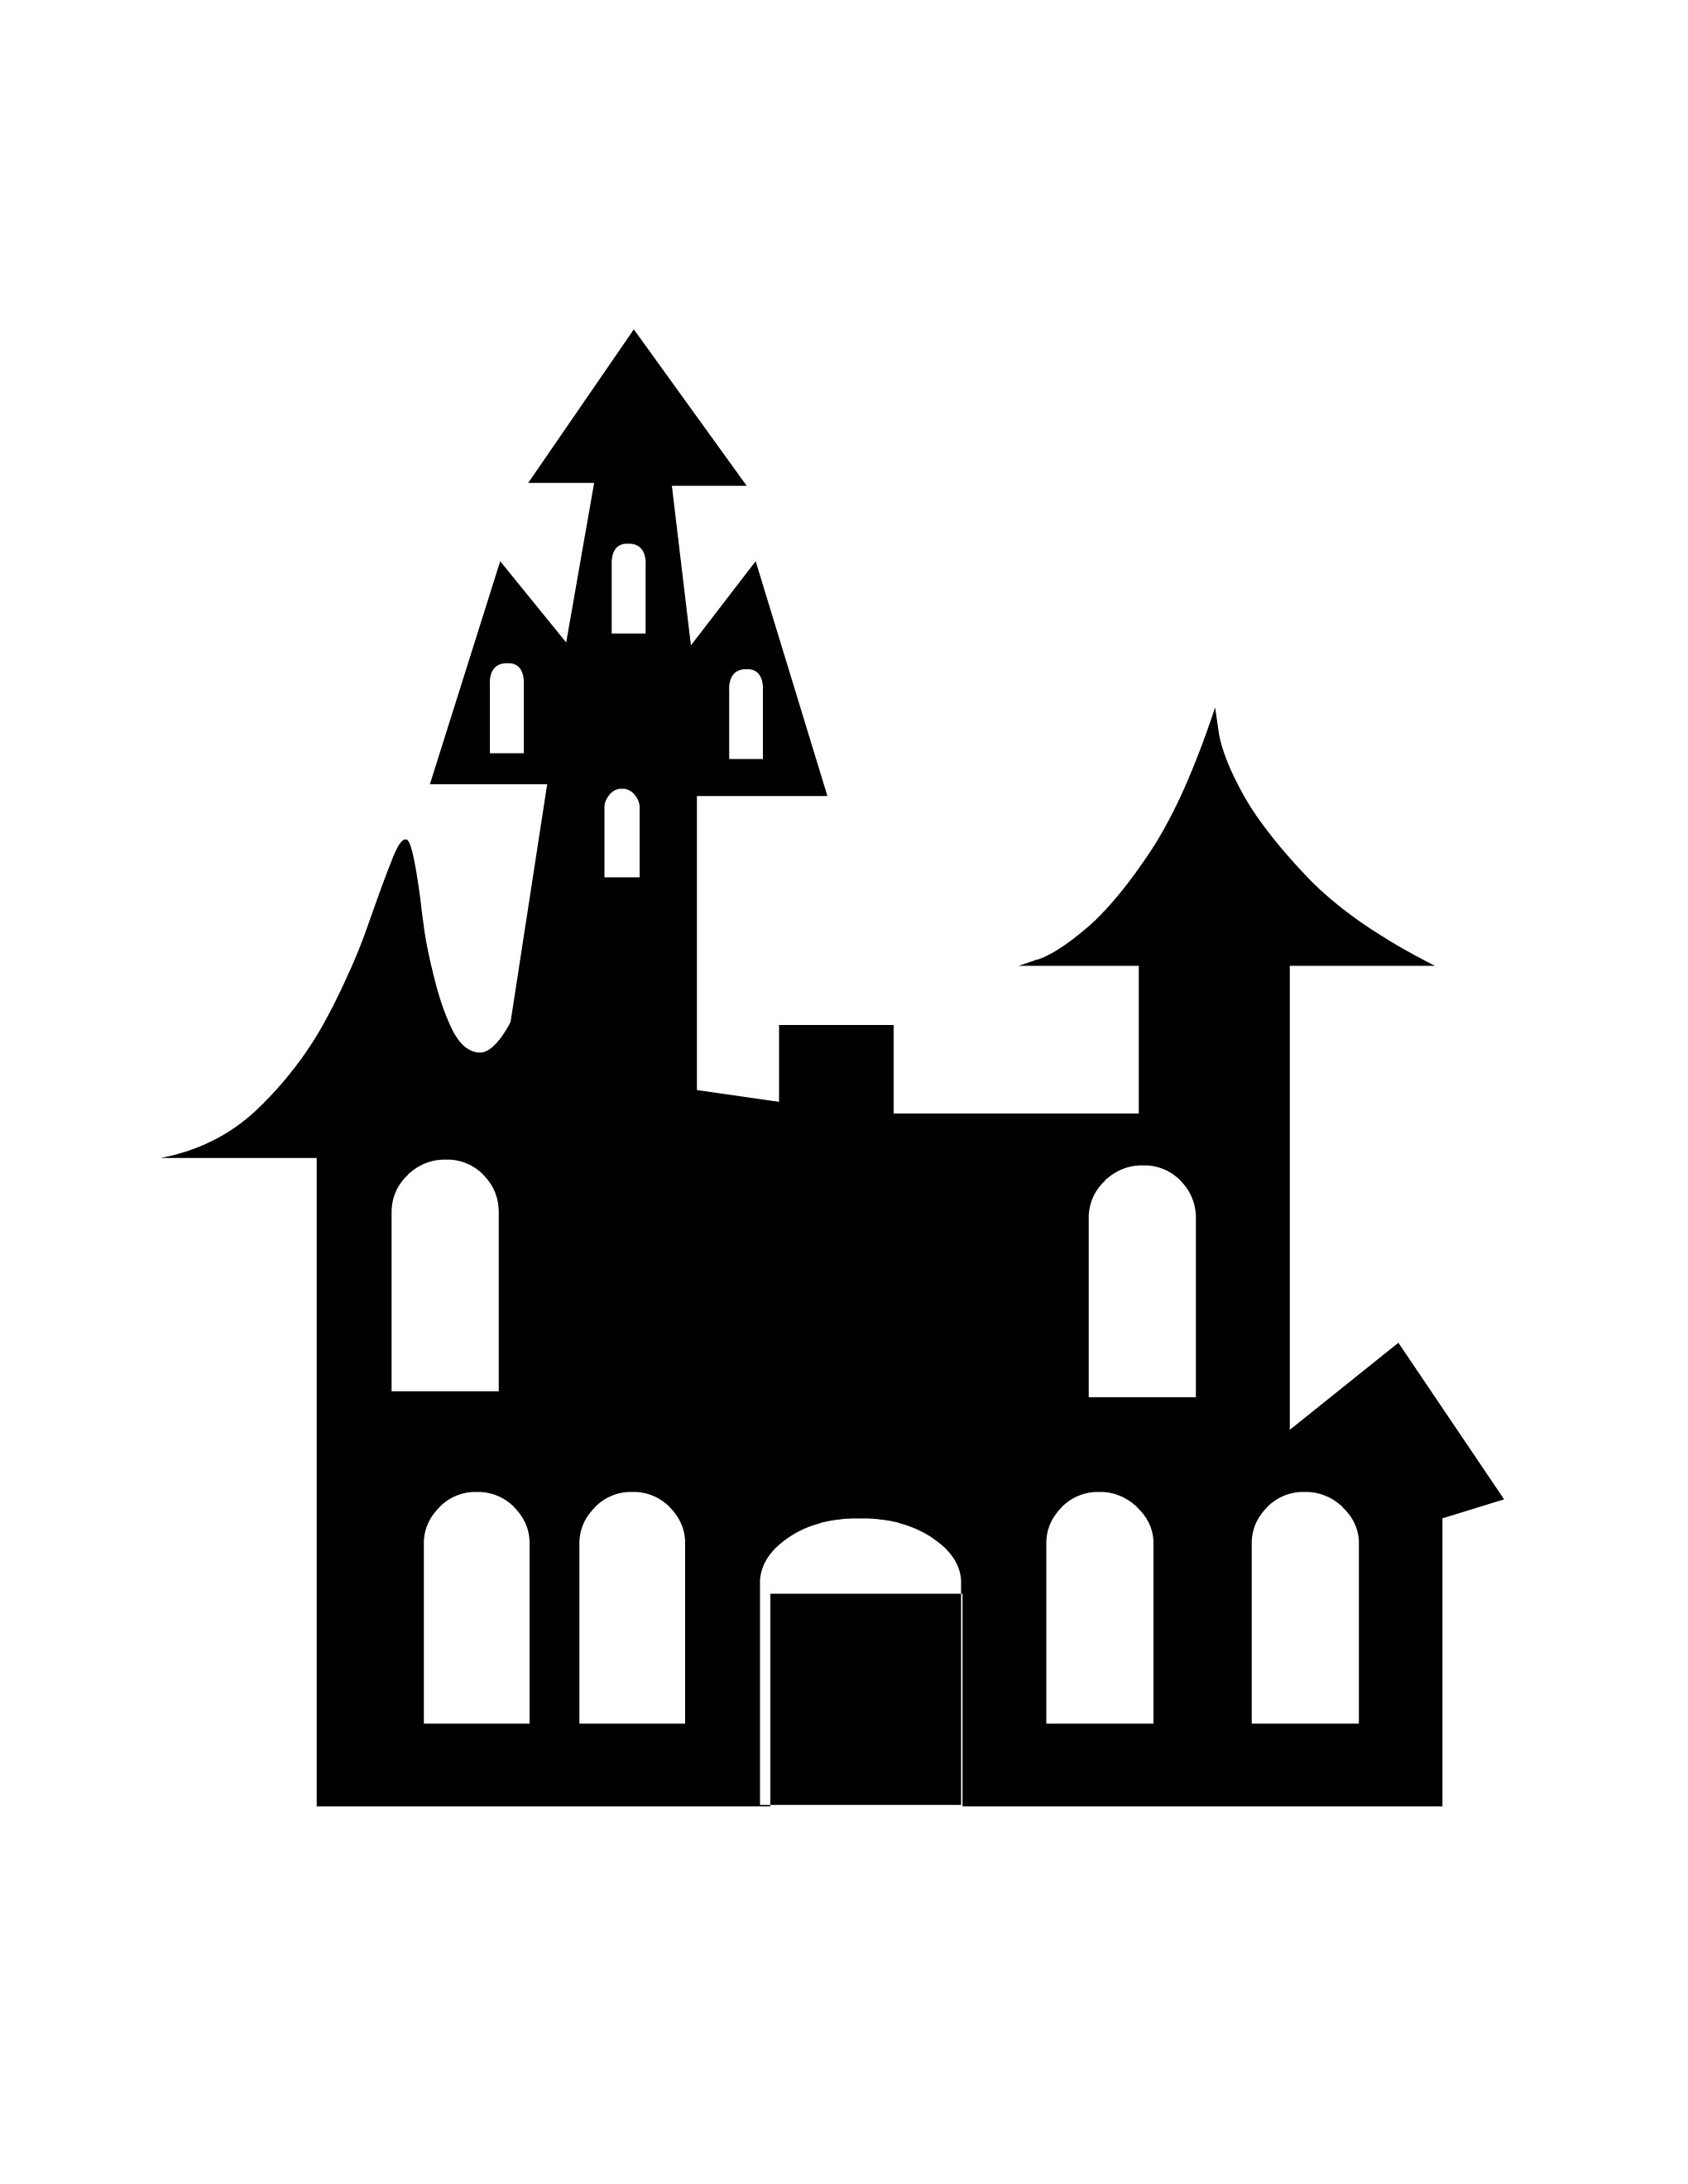 Haunted House Silhouette Template Images  Pictures - Becuo